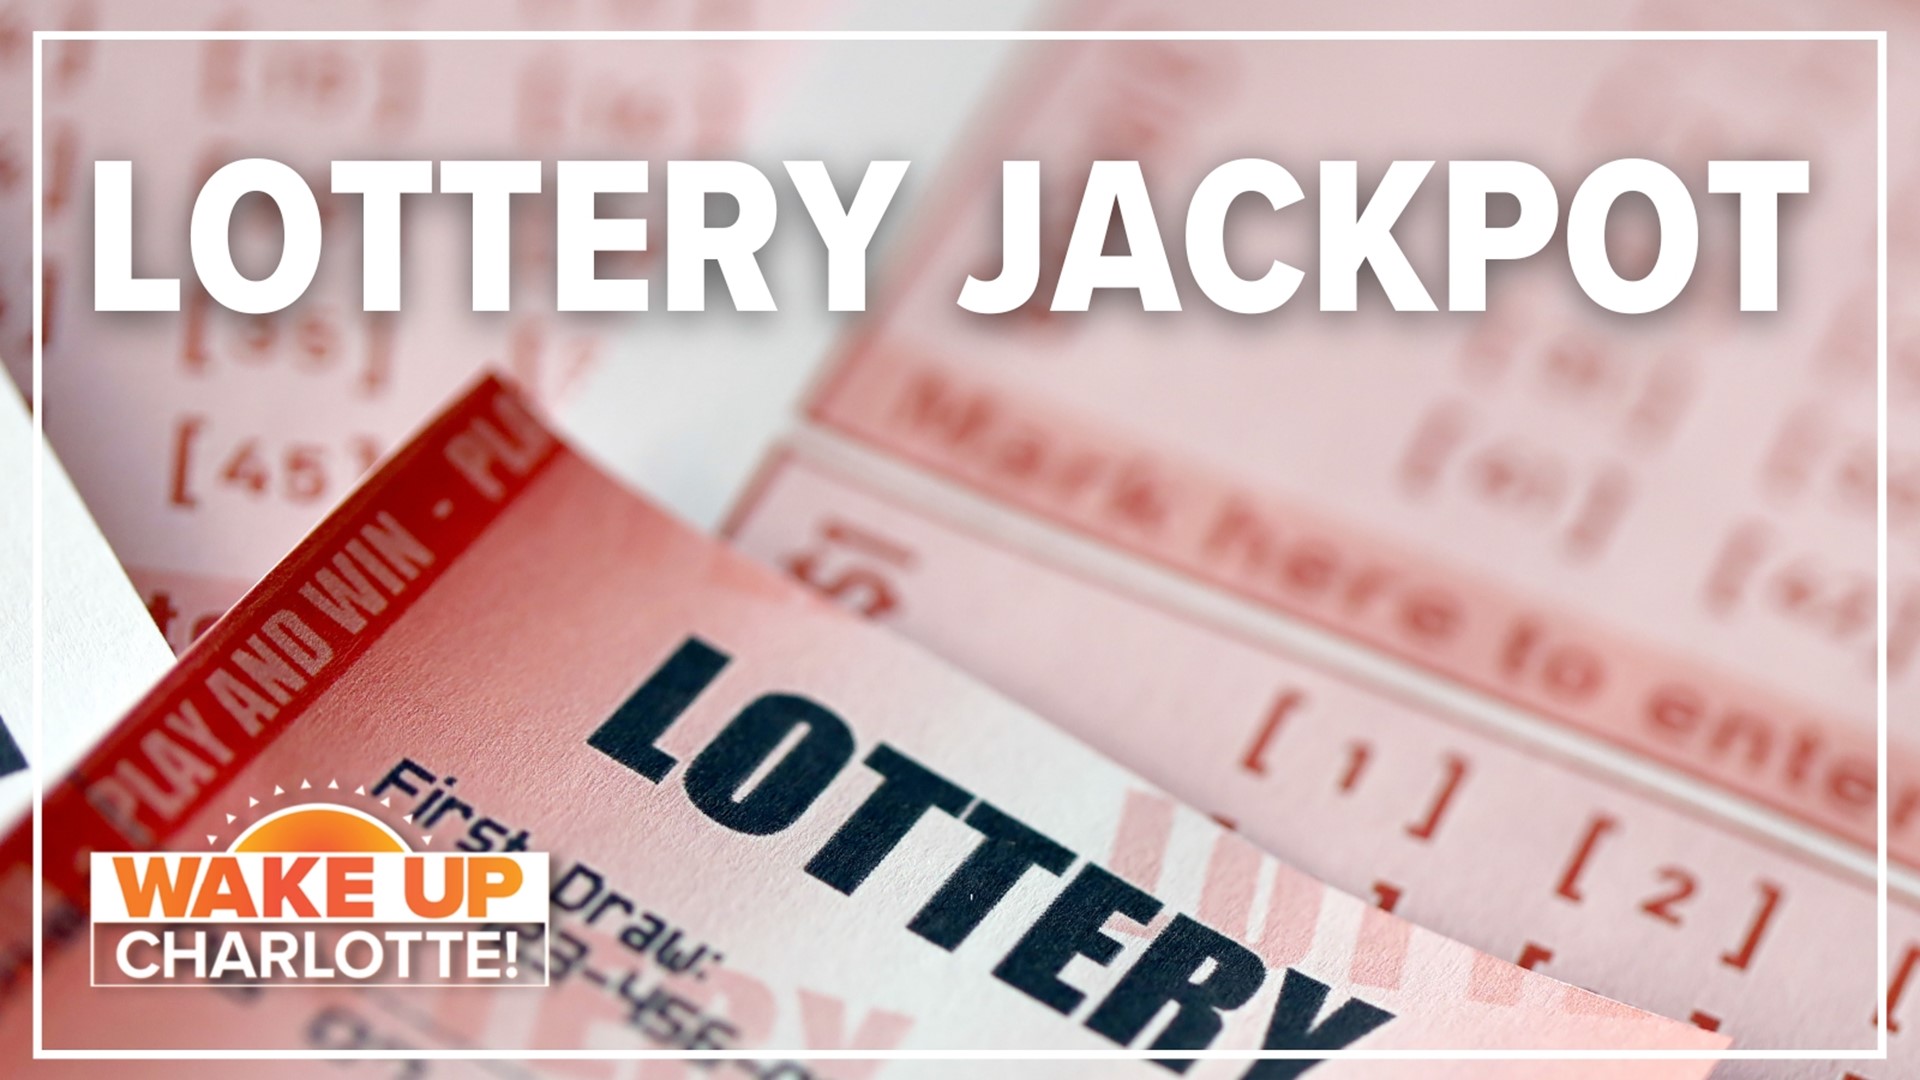 For the third time in the past year, we are about to see a jackpot of over $750 million. And it's no coincidence.